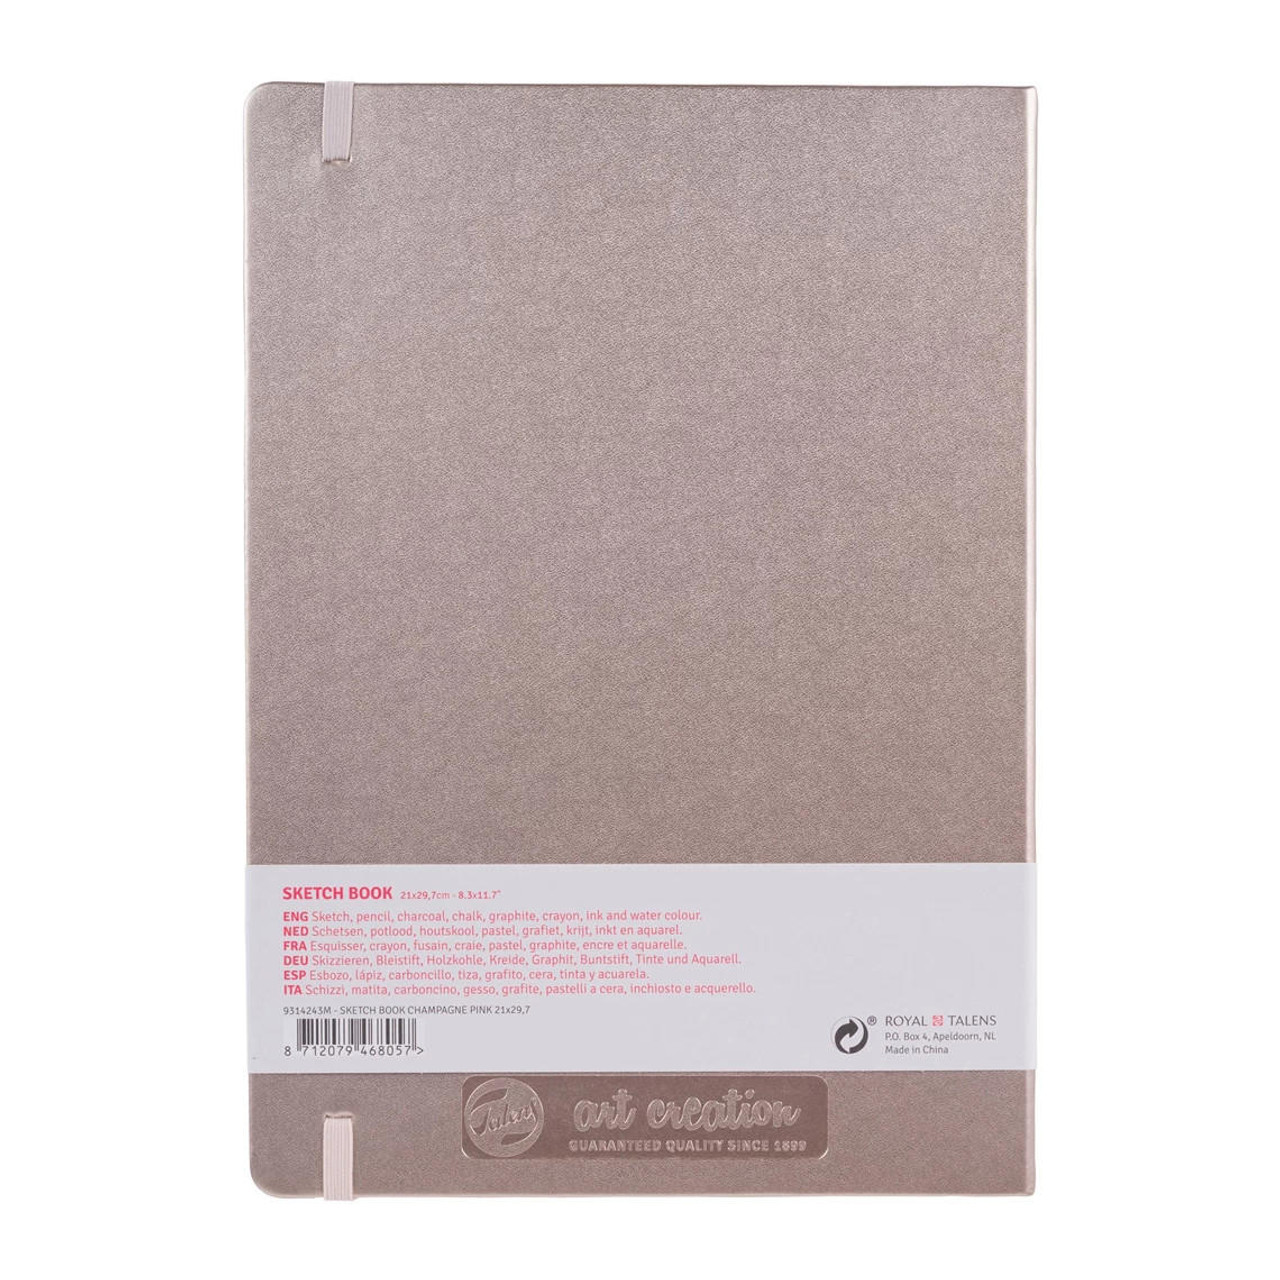 Mini Sketchbook, 3.5 x 5.5, 88 Pages - Pack of 2